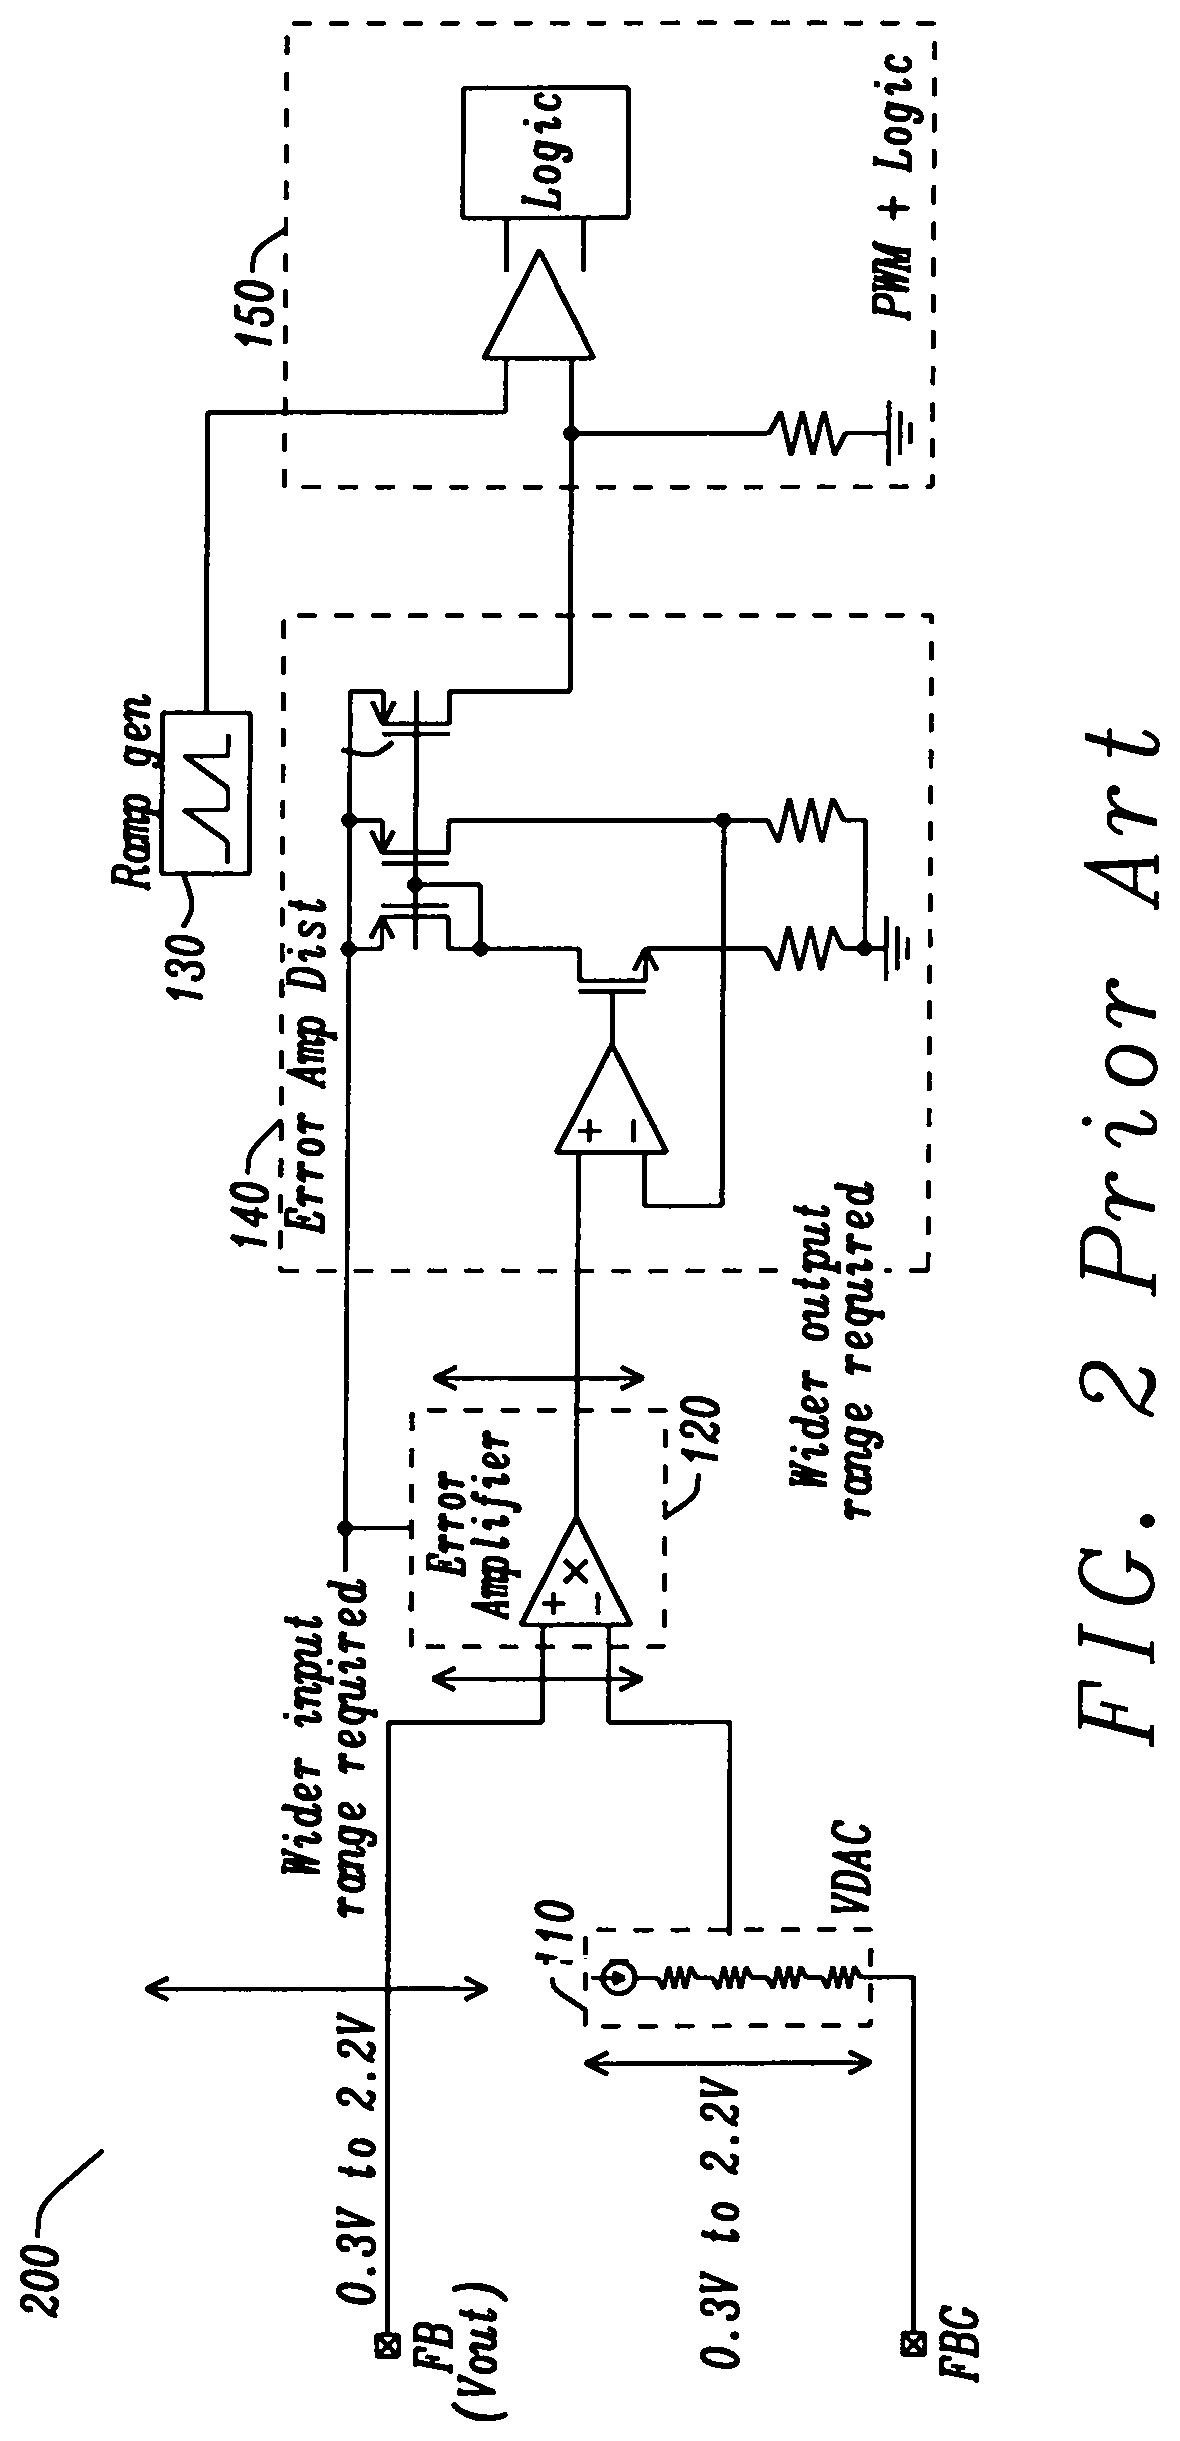 Feedback voltage DC level cancelling for configurable output DC-DC switching converters